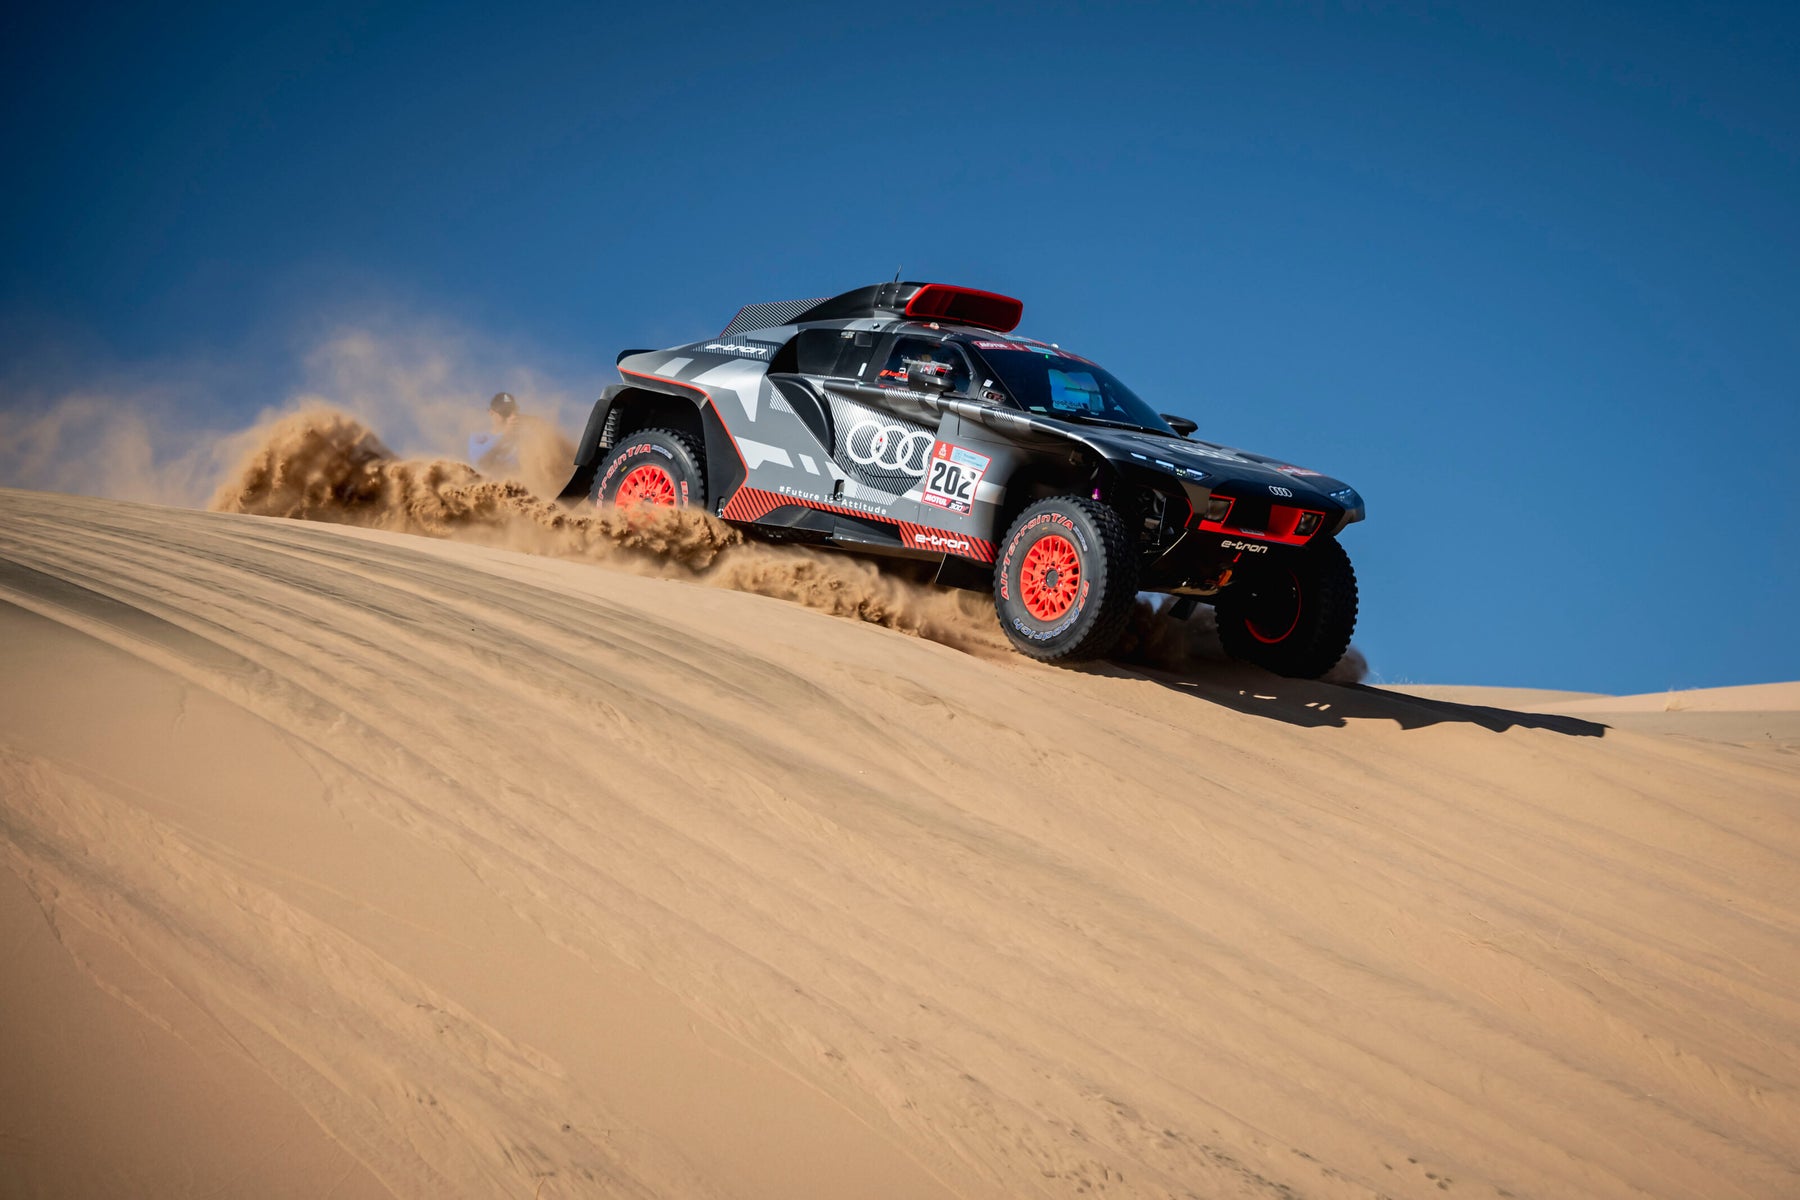 CARLOS SAINZ MAKES STRONG START IN 2022 DAKAR RALLY PROLOGUE WITH SECOND-PLACE FINISH